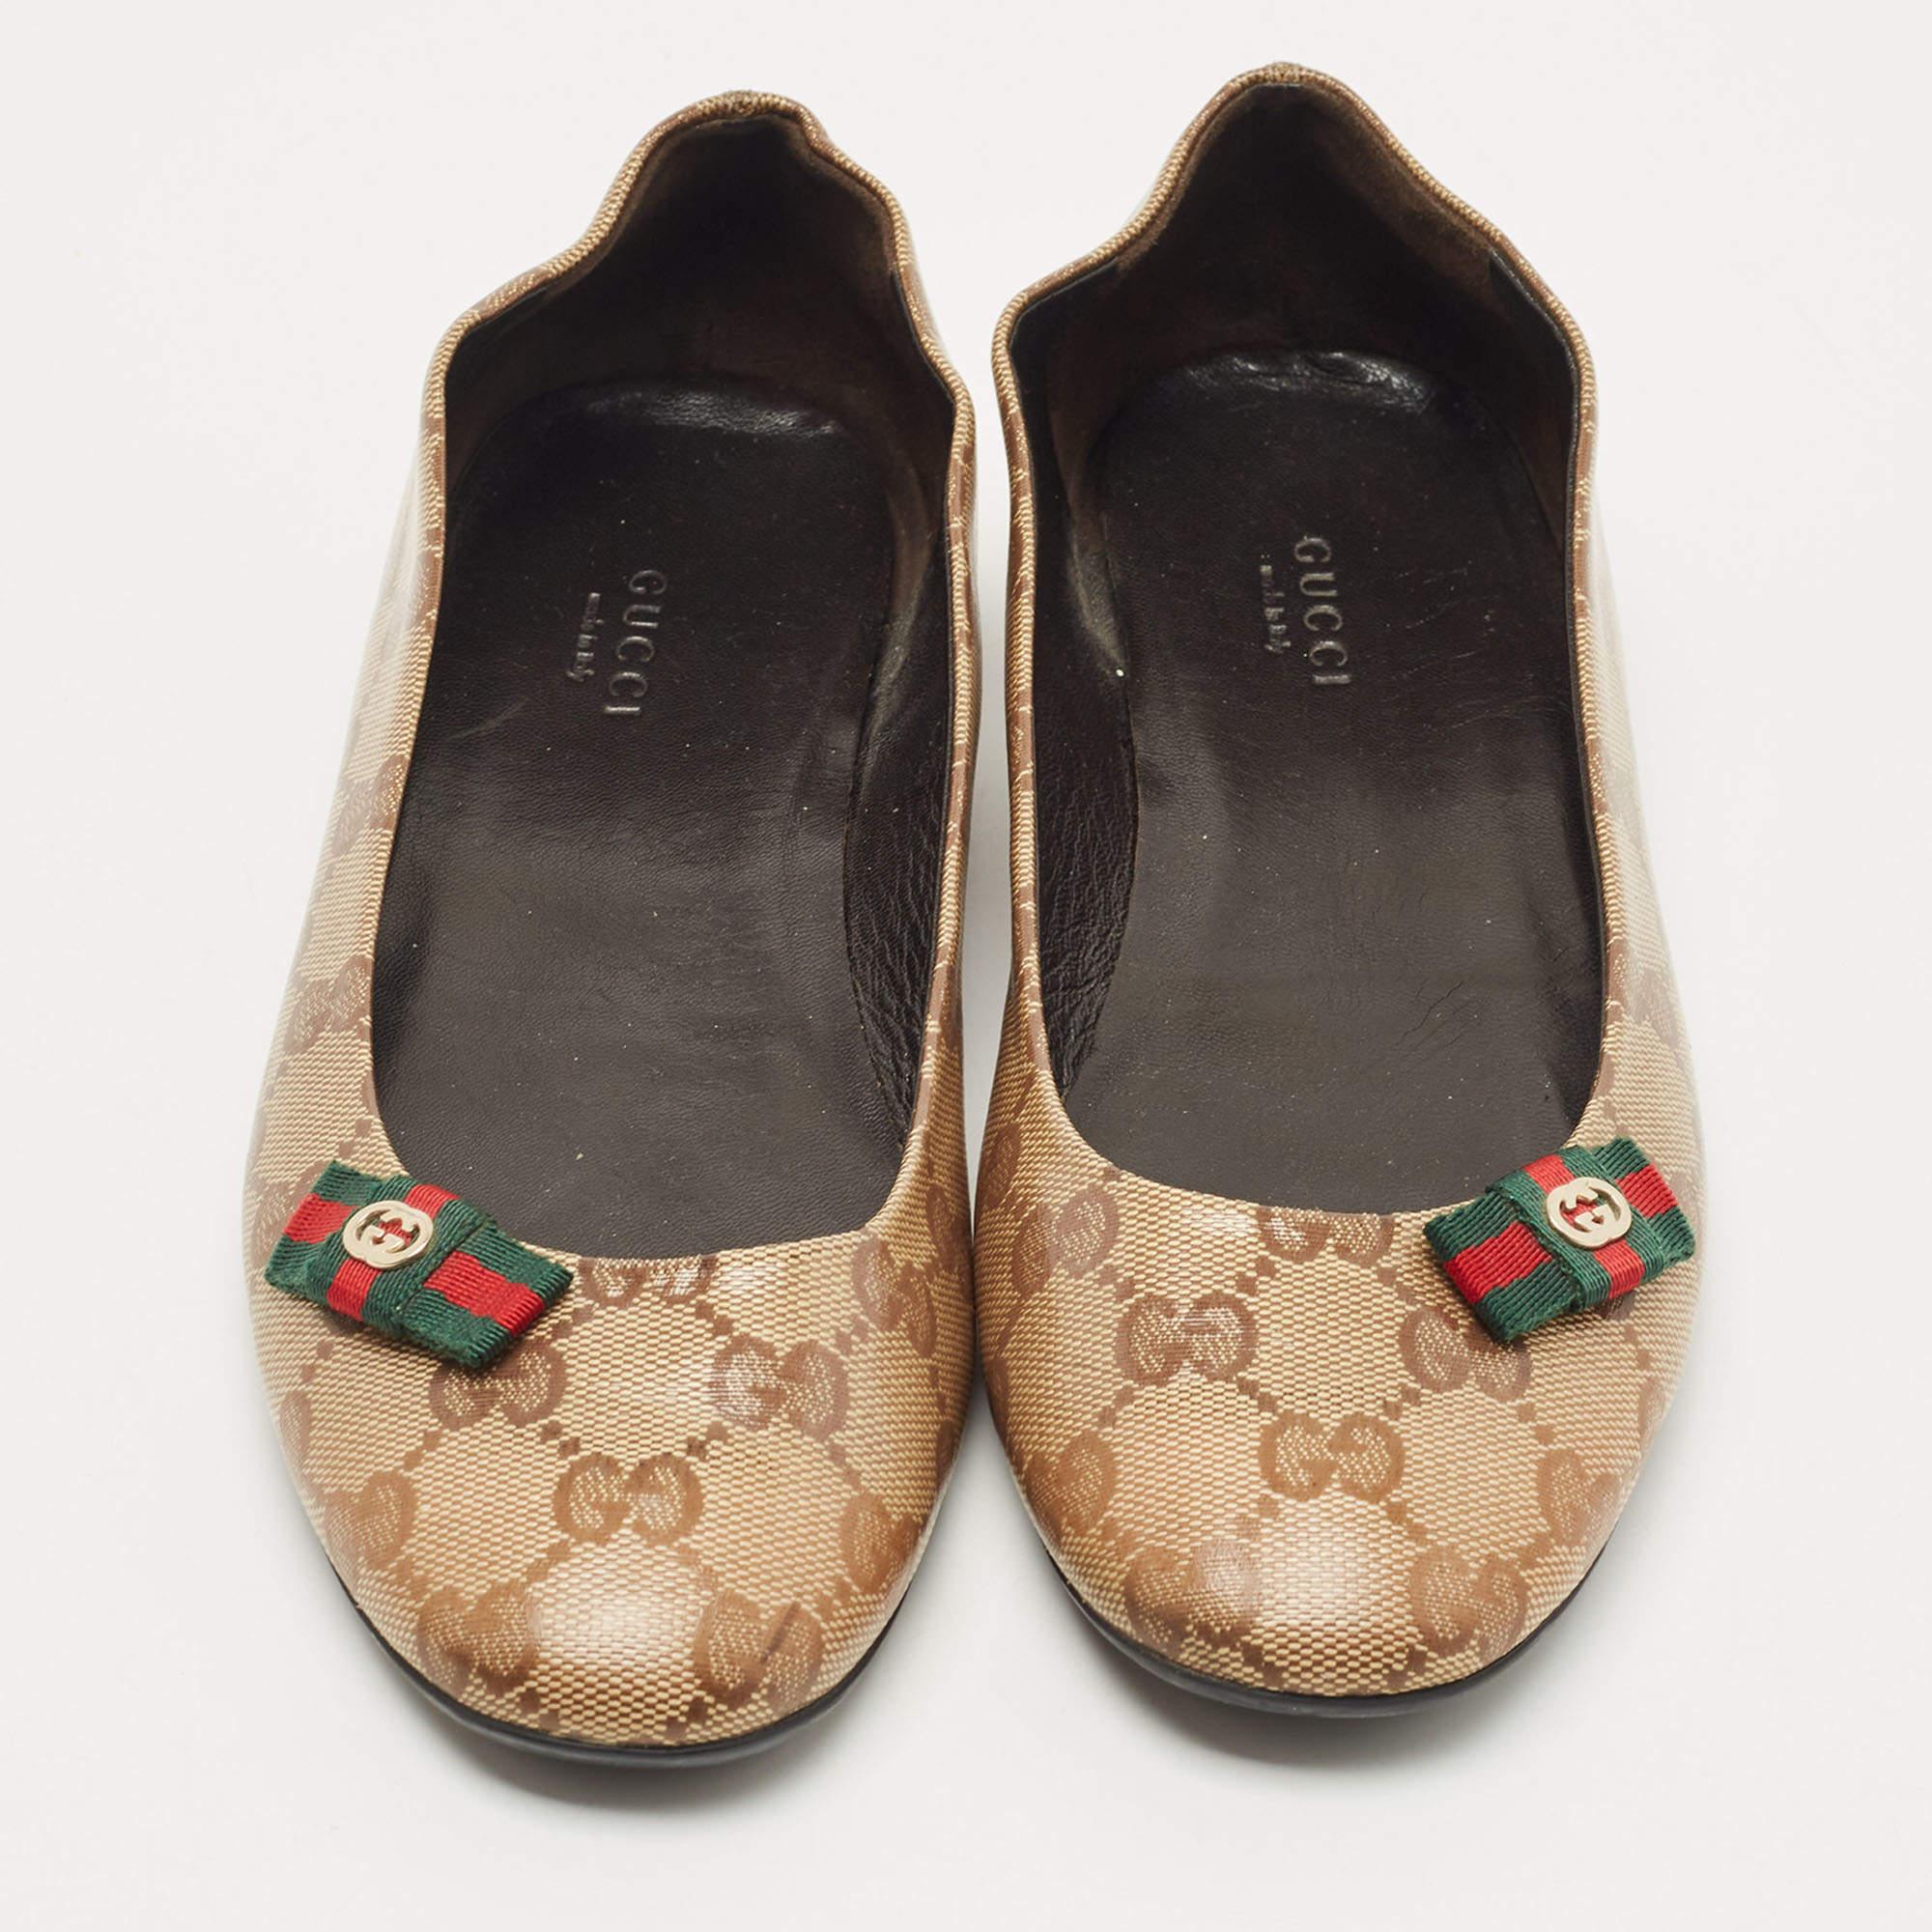 Complete your look by adding these designer ballet flats to your collection of everyday footwear. They are crafted skilfully to grant the perfect fit and style.


Includes
Original Box, Price Tag